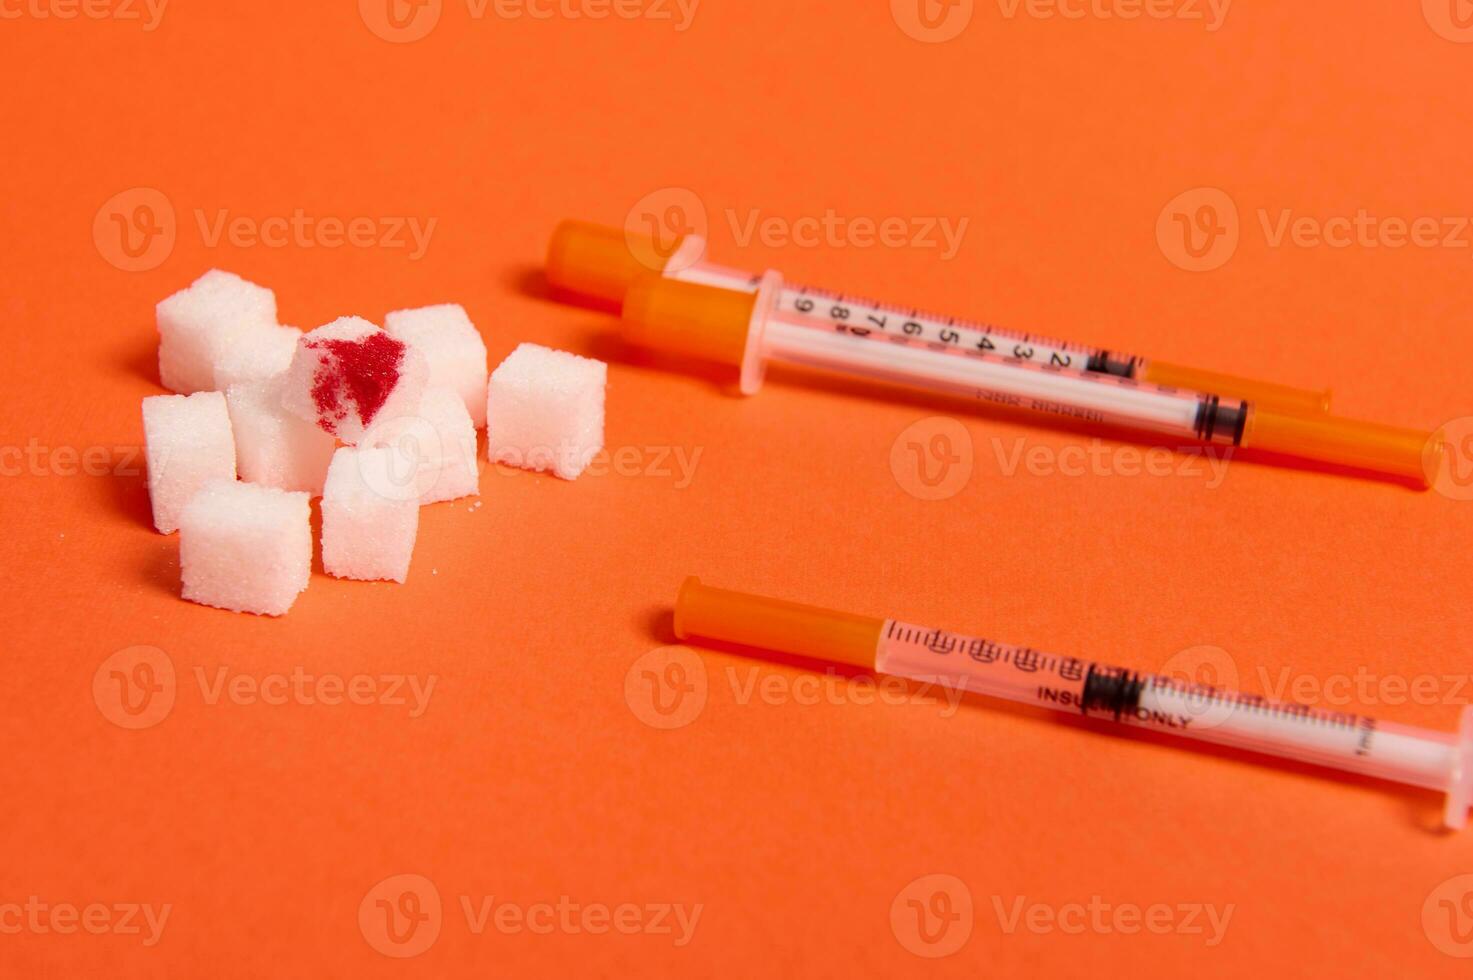 Refined pure white sugar cubes with blood drop and insulin syringes lying on orange background with copy space for World Diabetes Day medical advertisement. World diabetes awareness day, 14 November photo